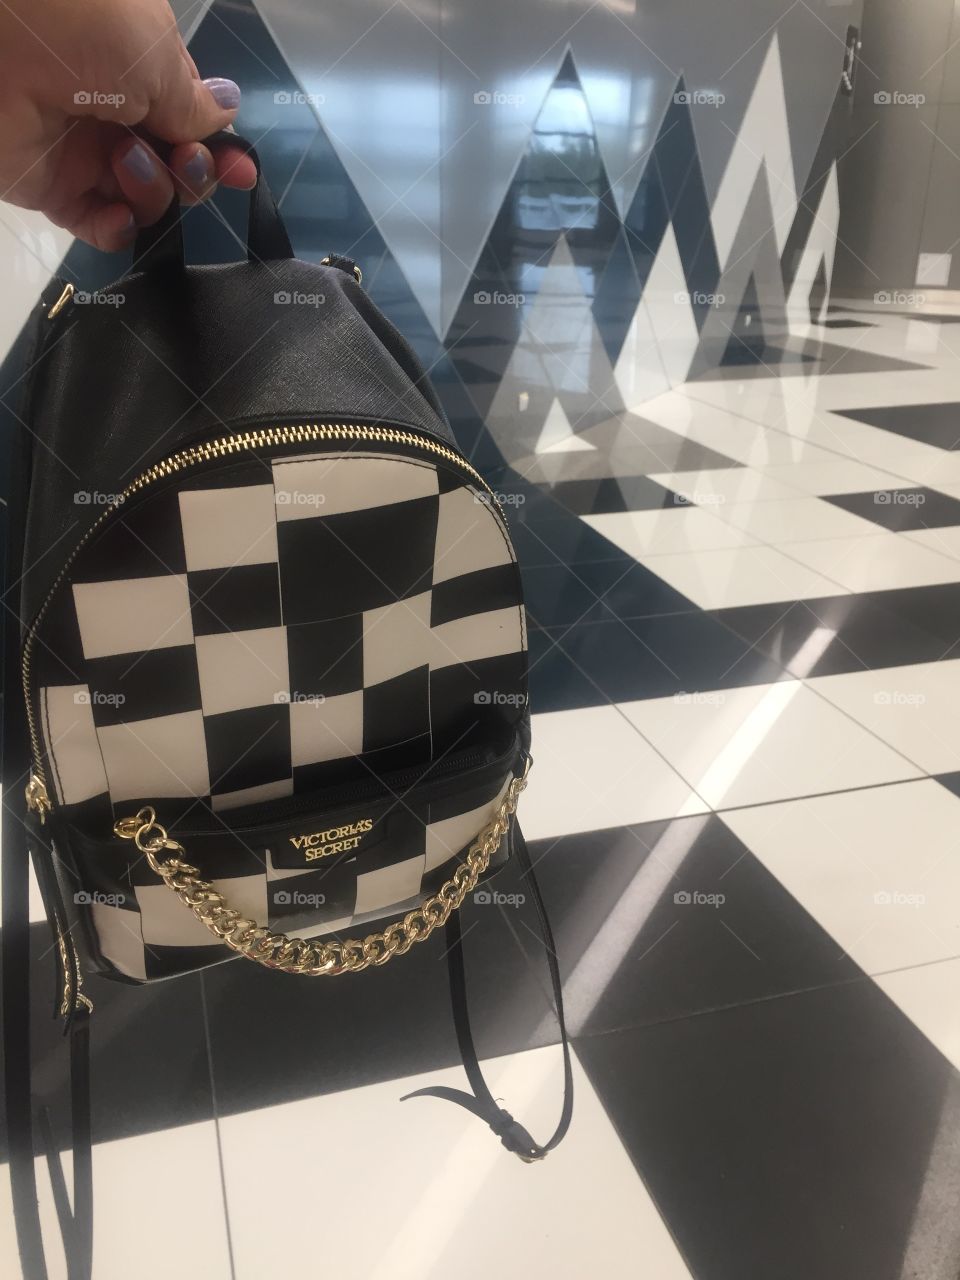 My purse matches the floor at the airport 